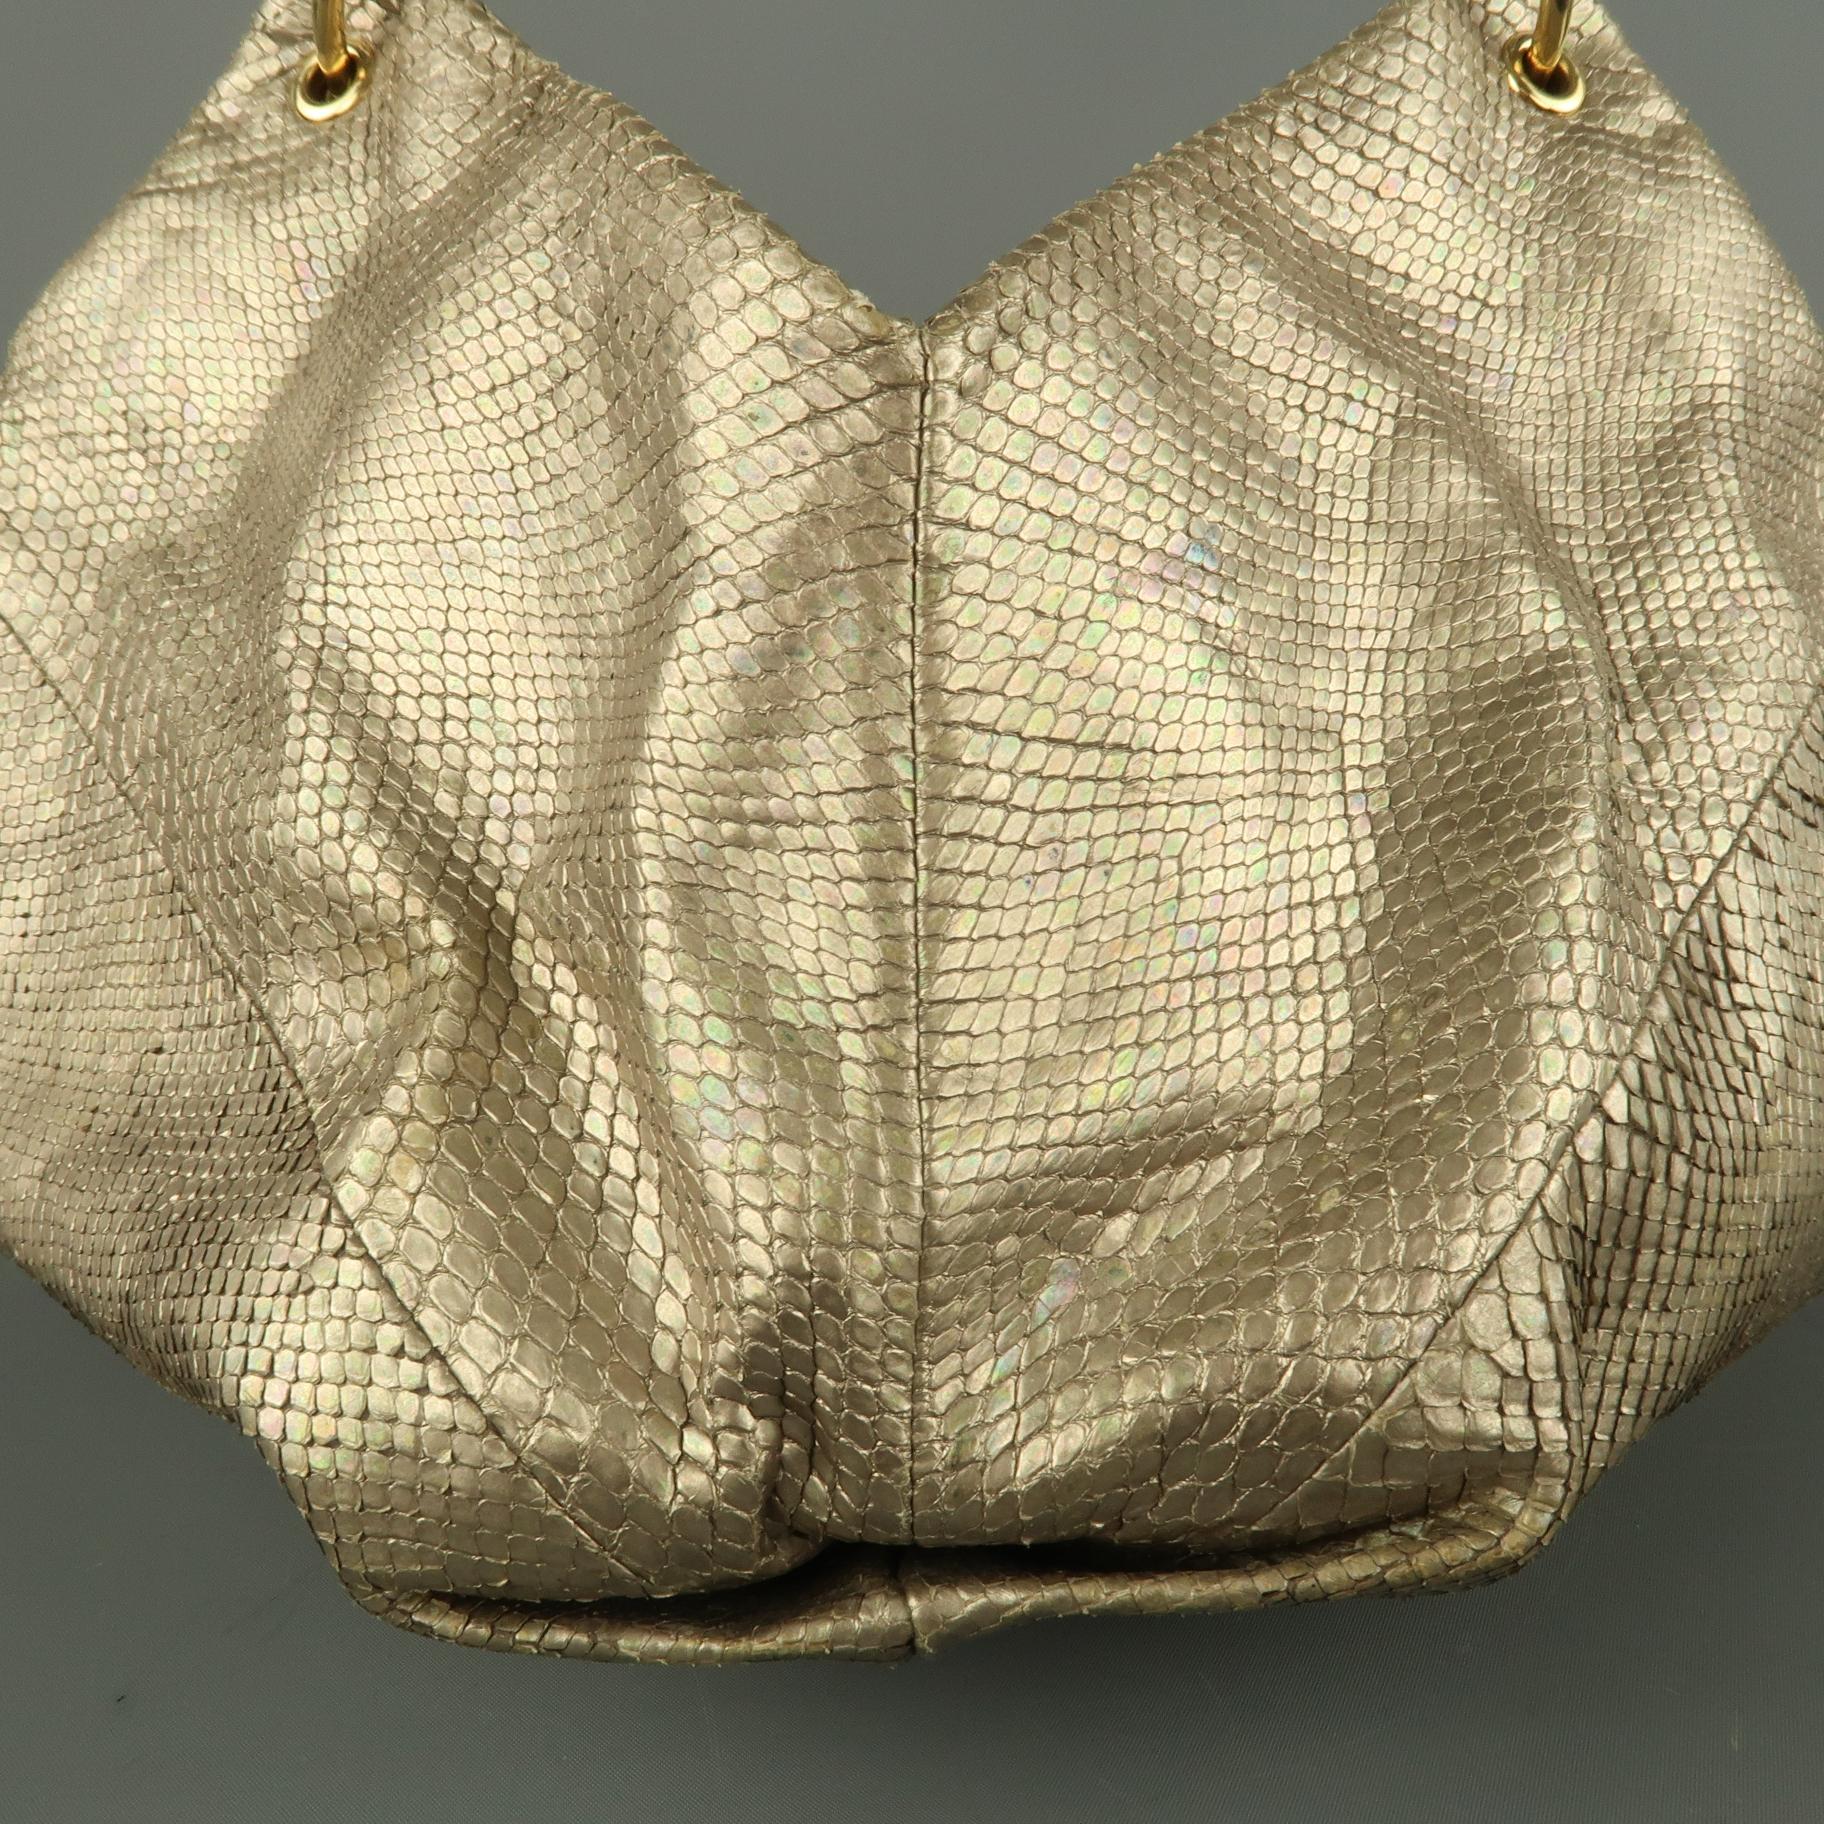 Vintage BOTTEGA VENETA hobo bag comes in metallic light gold iridescent snake skin with a unique structured diamond shape, rolled top handle with gold tone loop hardware, and green suede dual compartment interior with zip divider and mirror. Made in